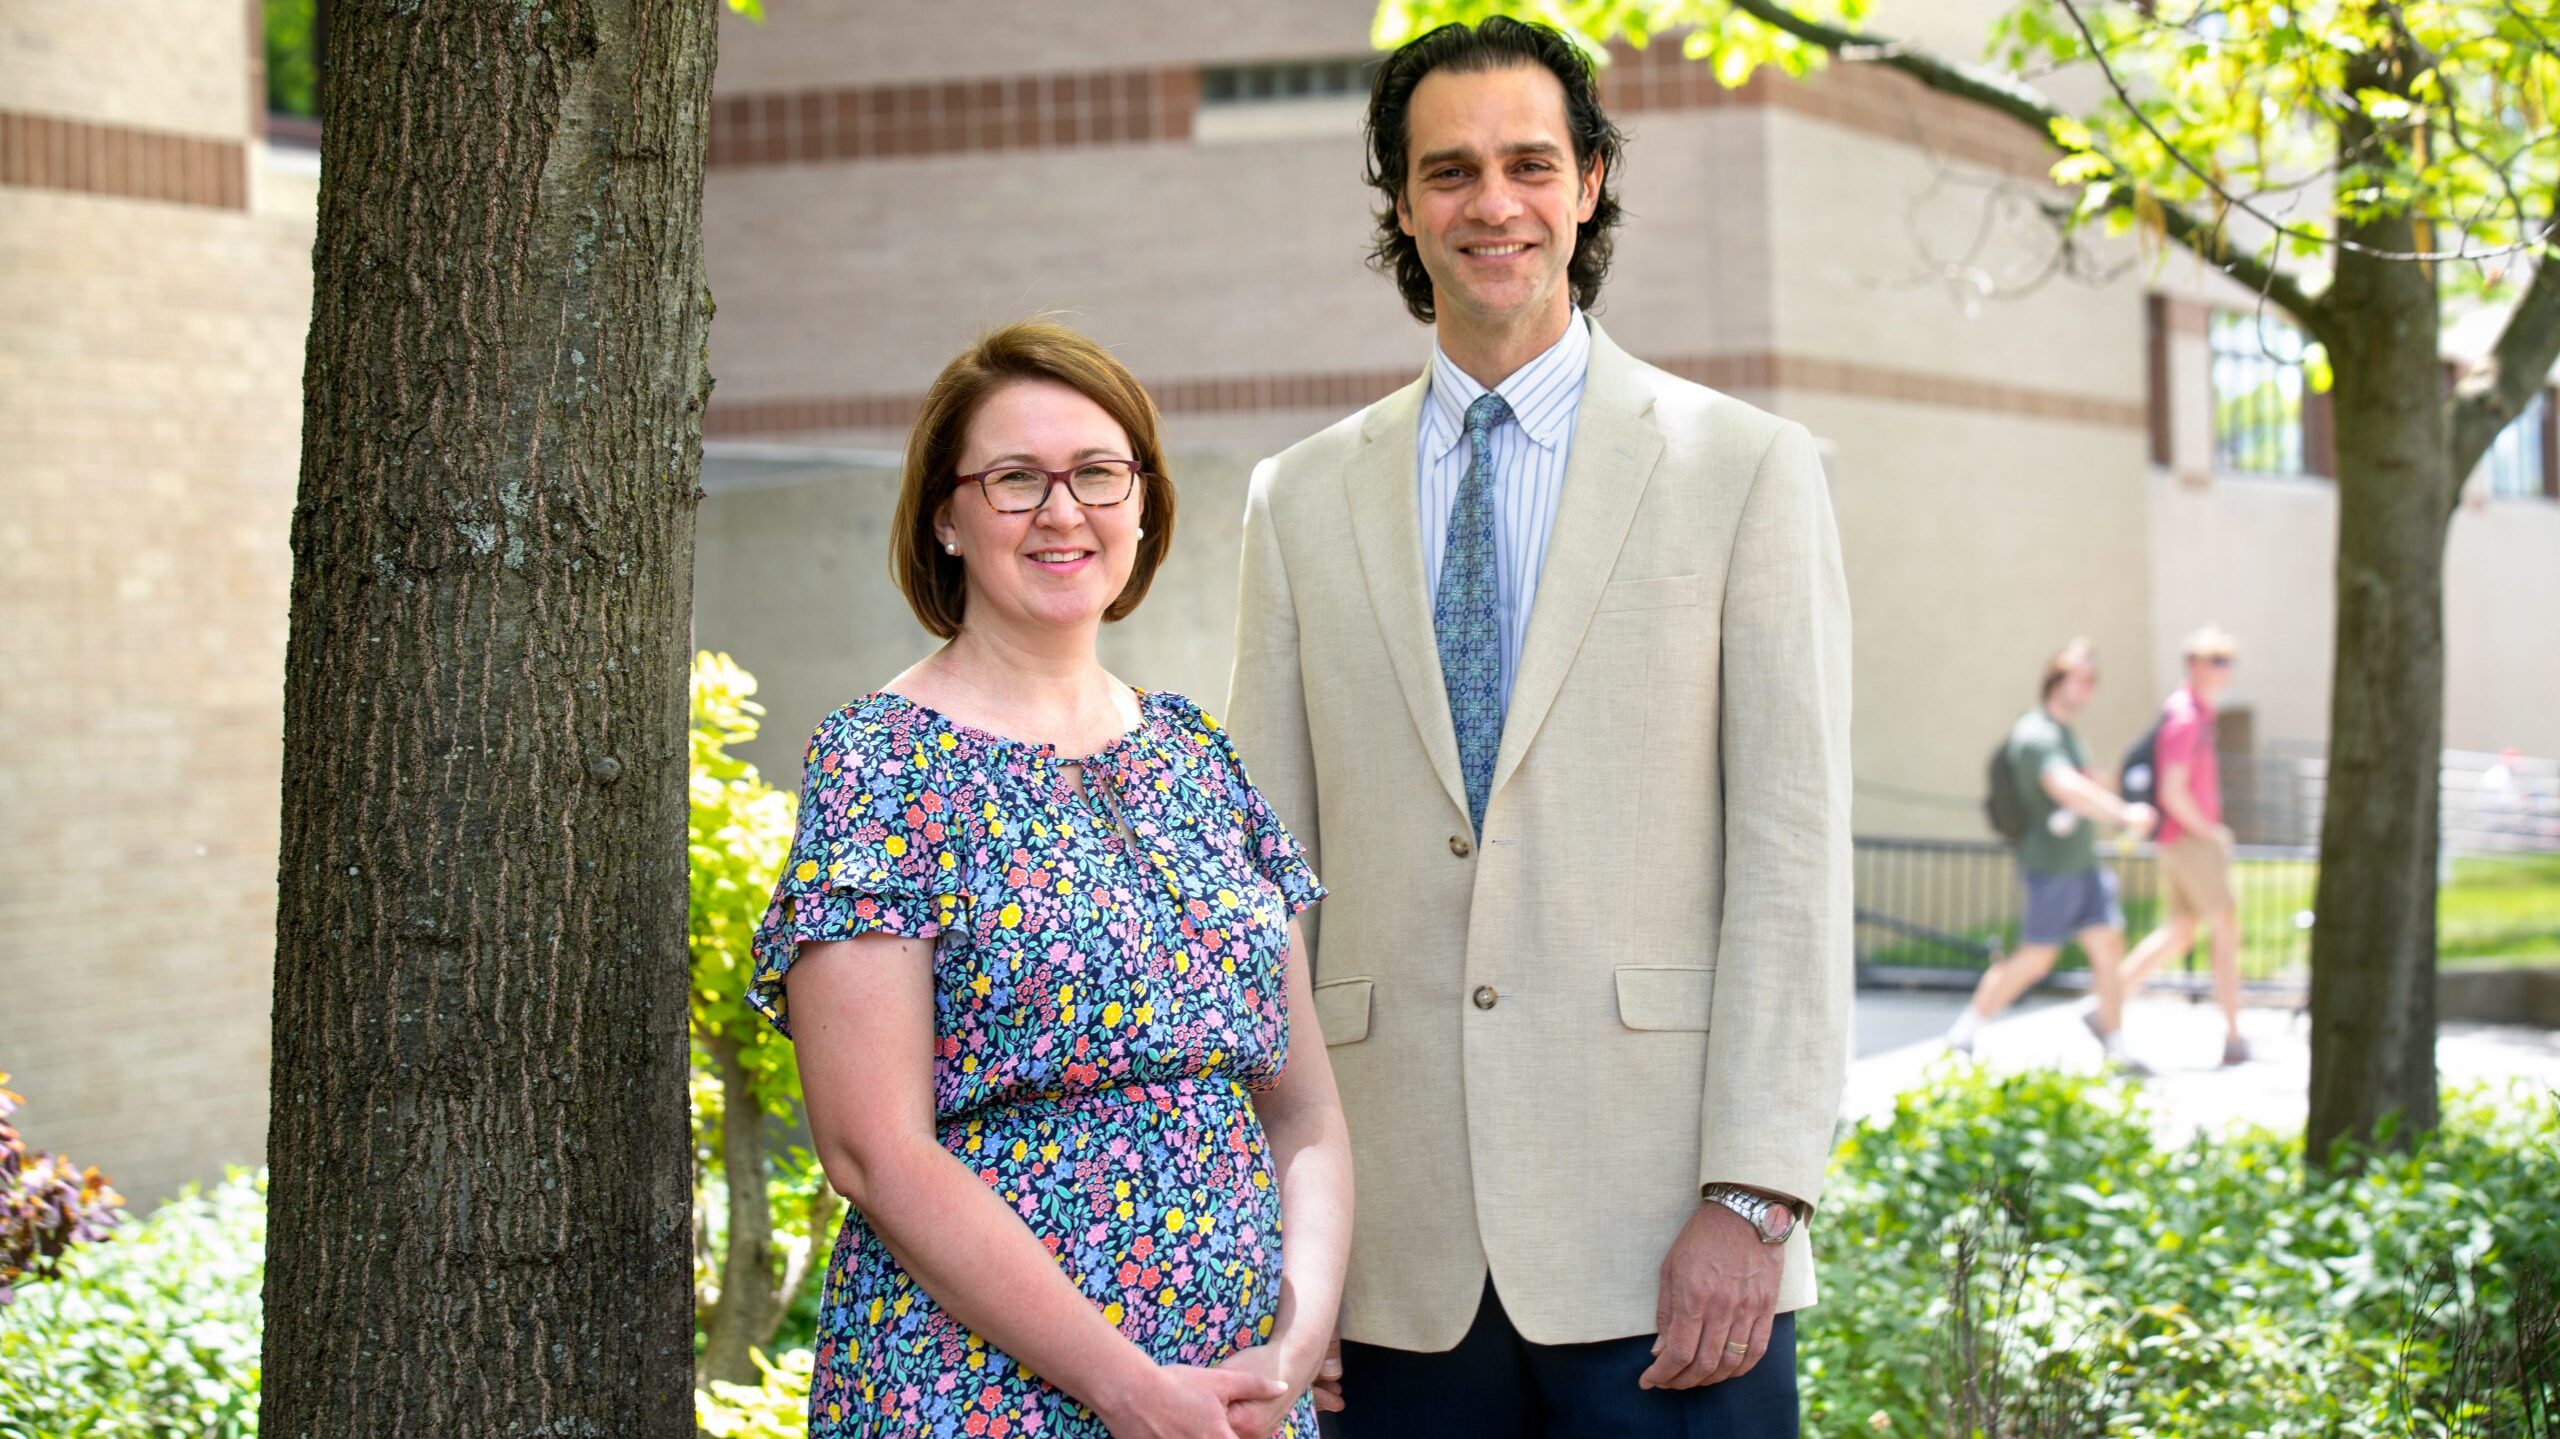 Krista Saleet, will be deputy executive director of Public Engagement, and Basil Safi, will be executive director.